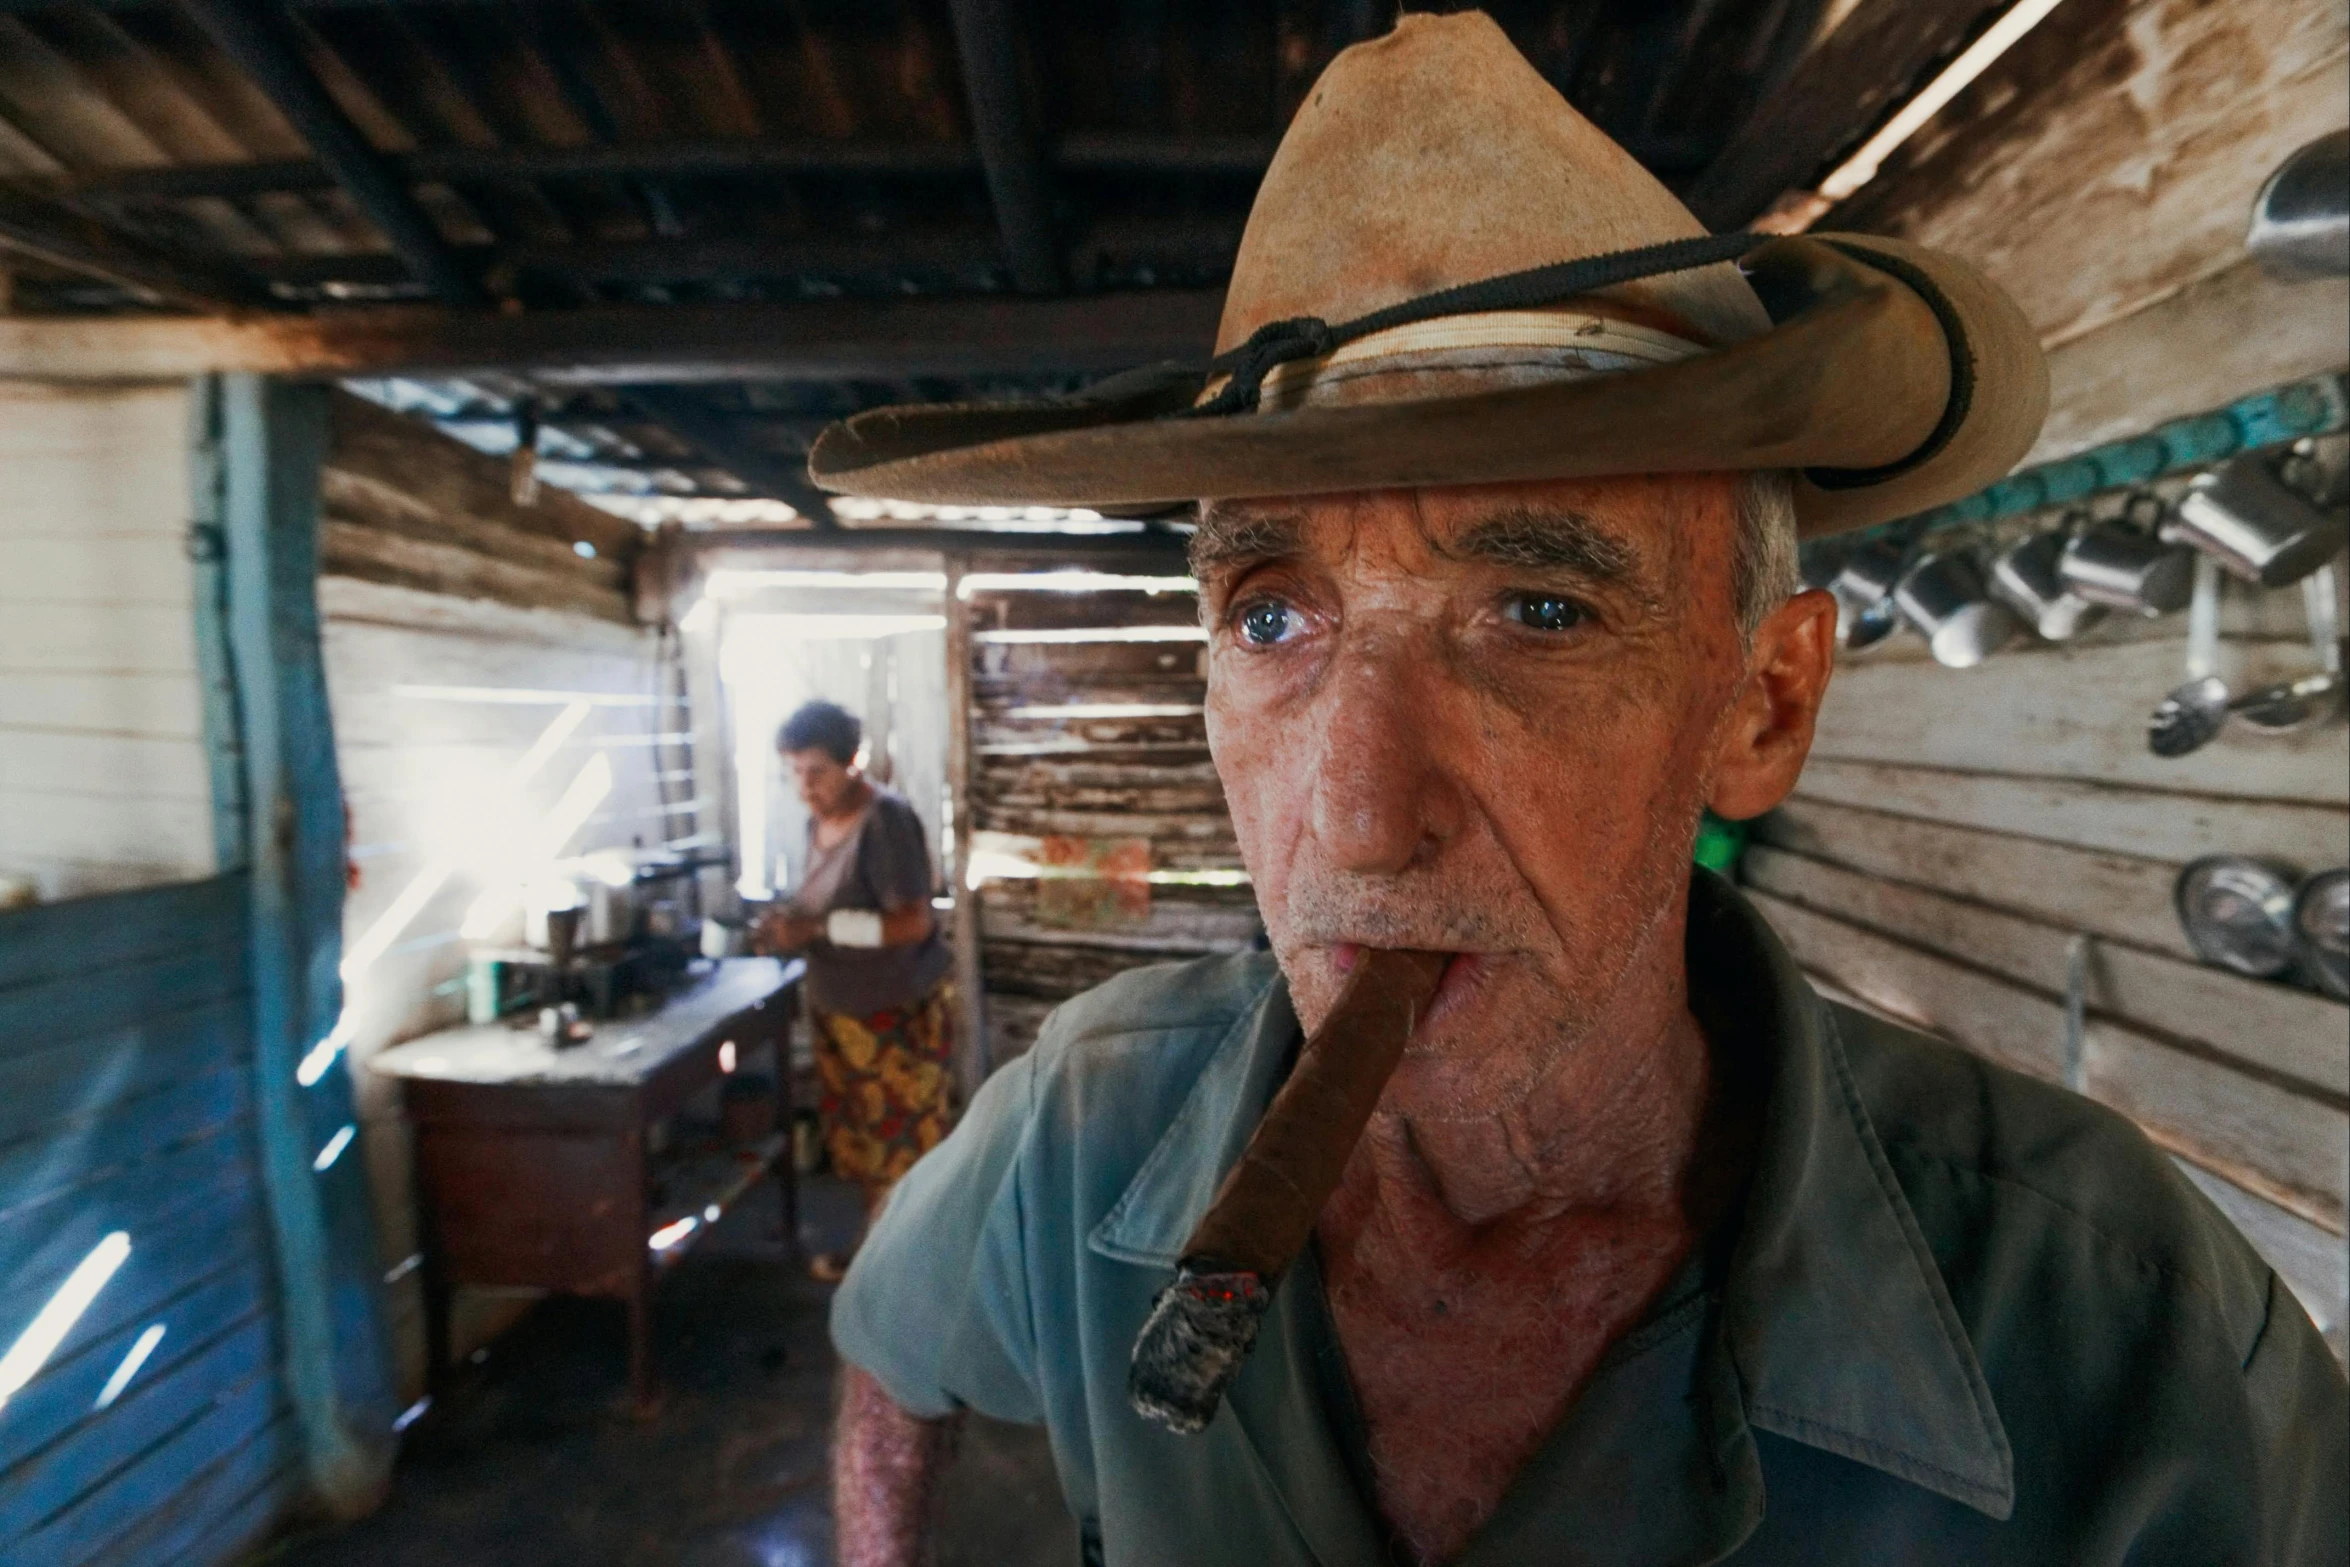 a man in a cowboy hat smoking a cigar, by Peter Churcher, apocalypse now, caravan, aussie baristas, two old people